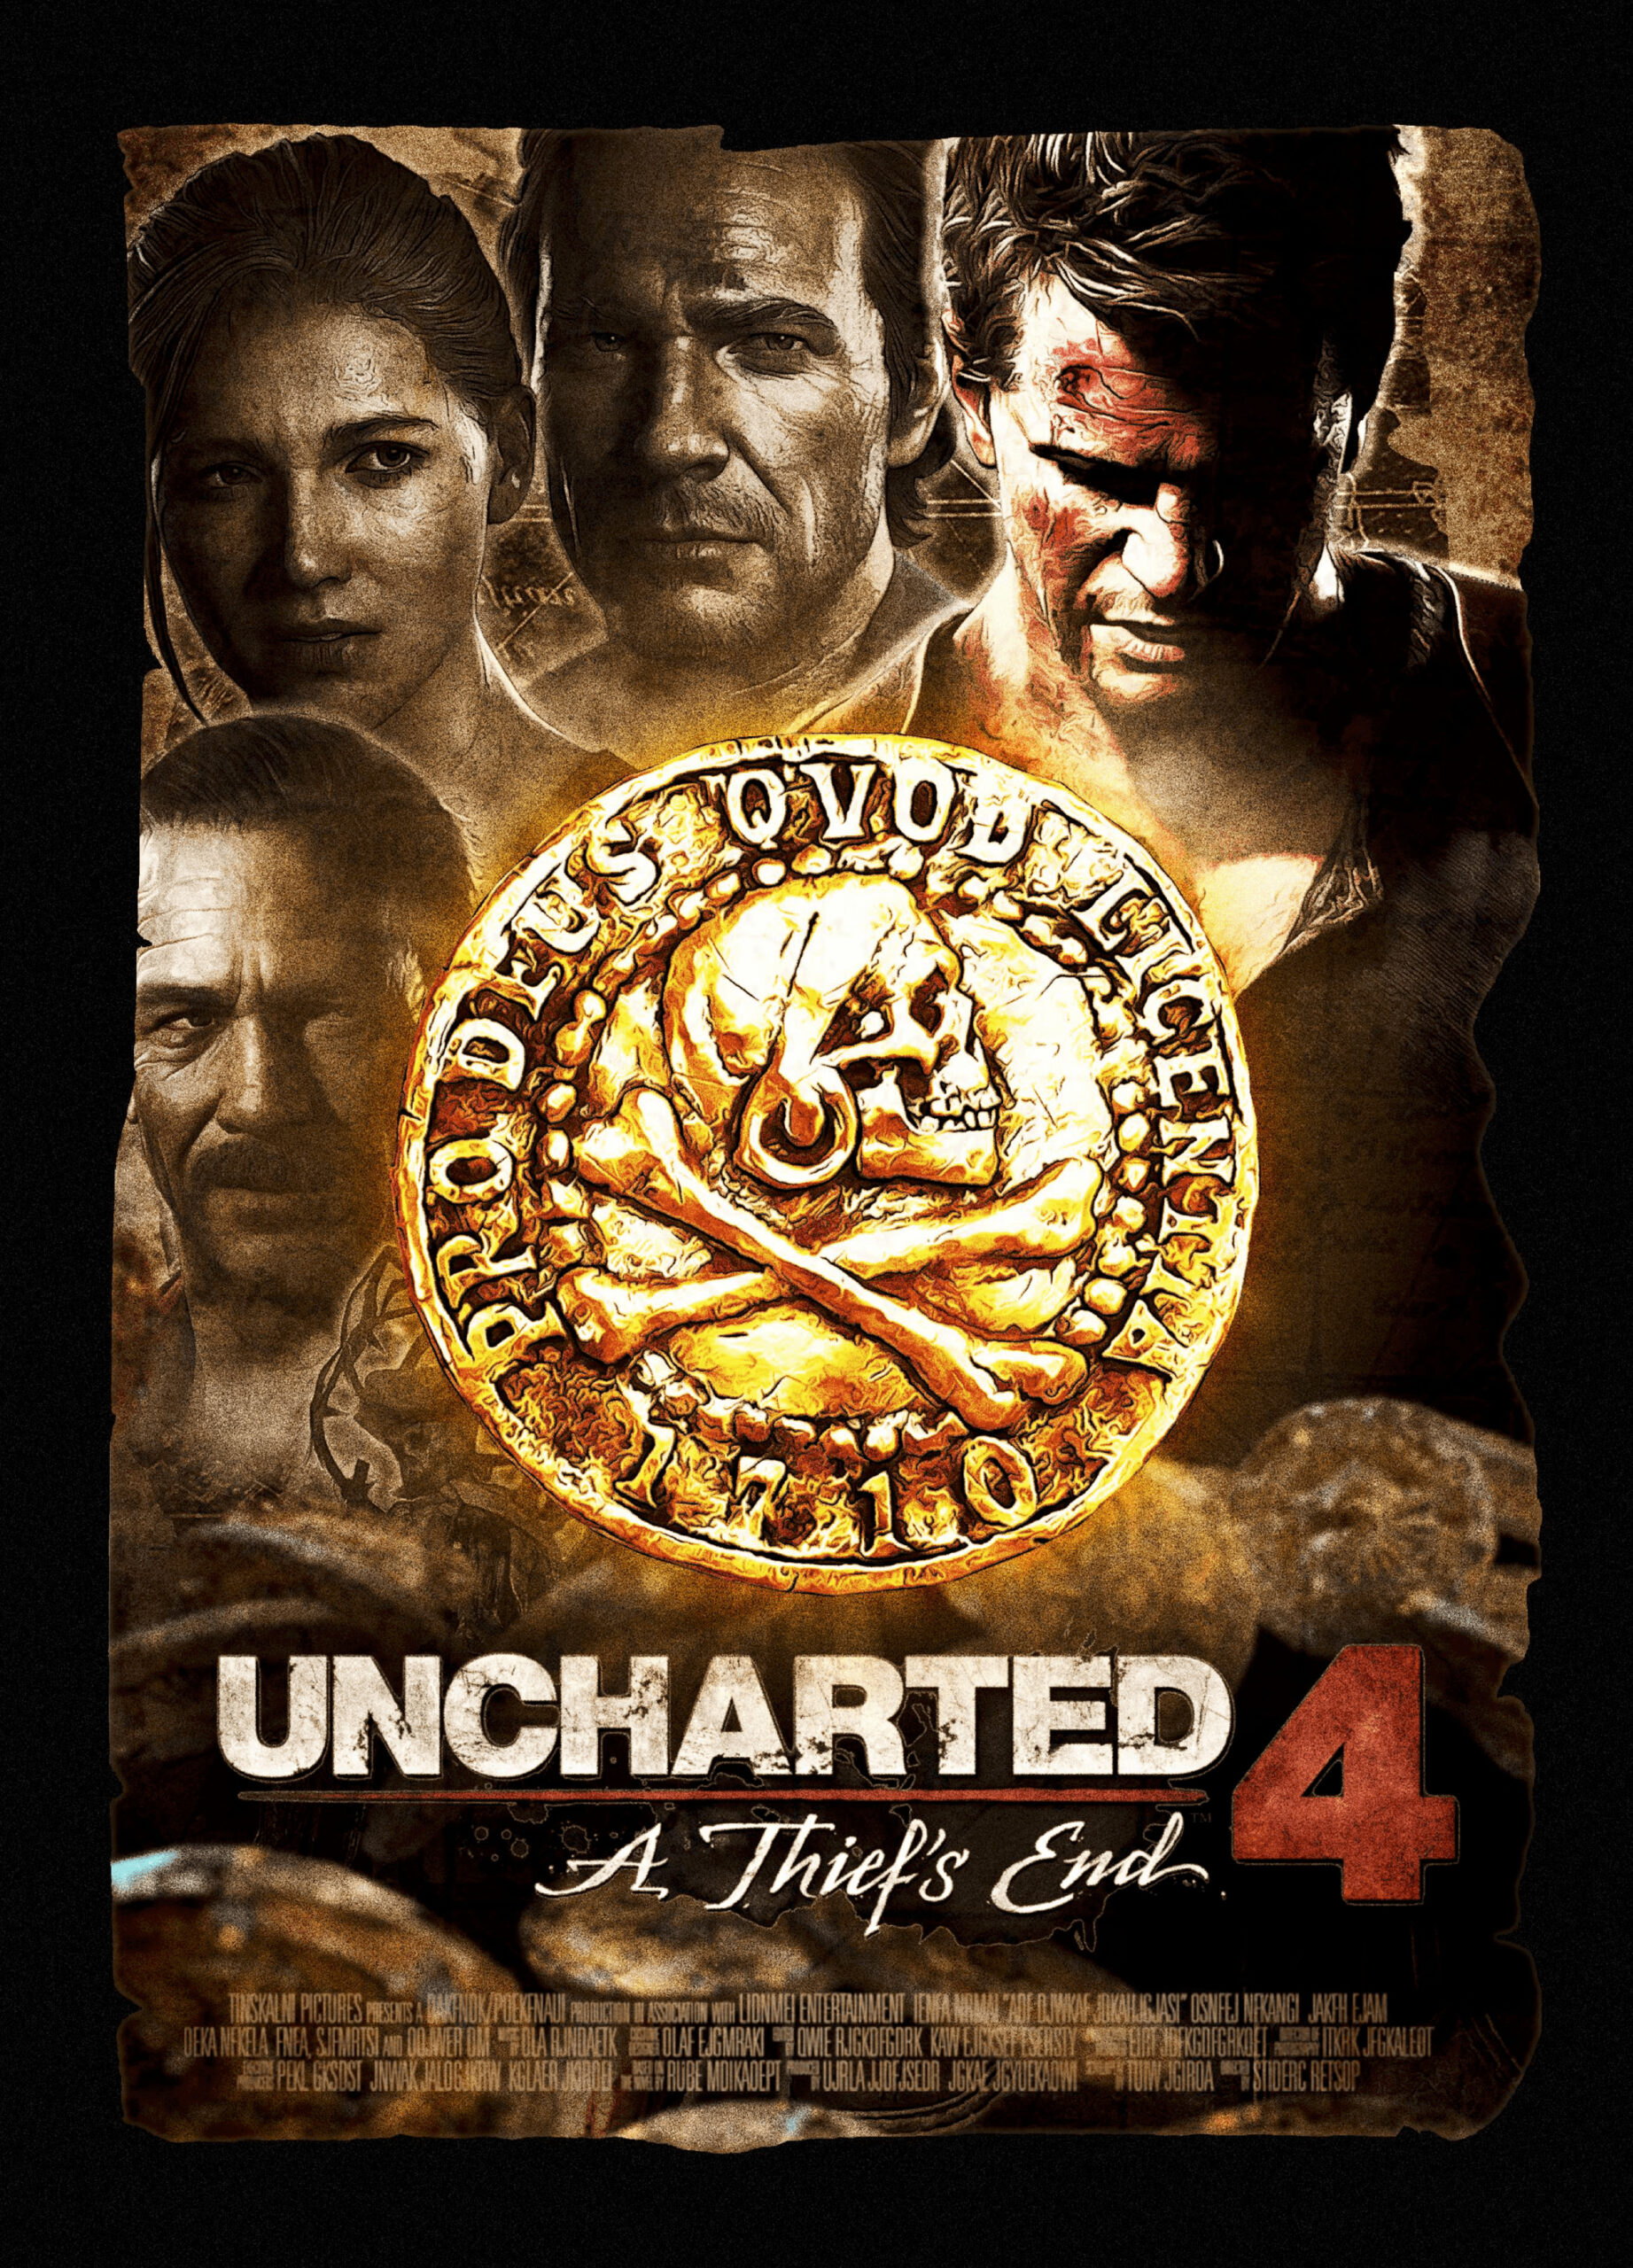 Uncharted 4 : A Thief’s End – Poster